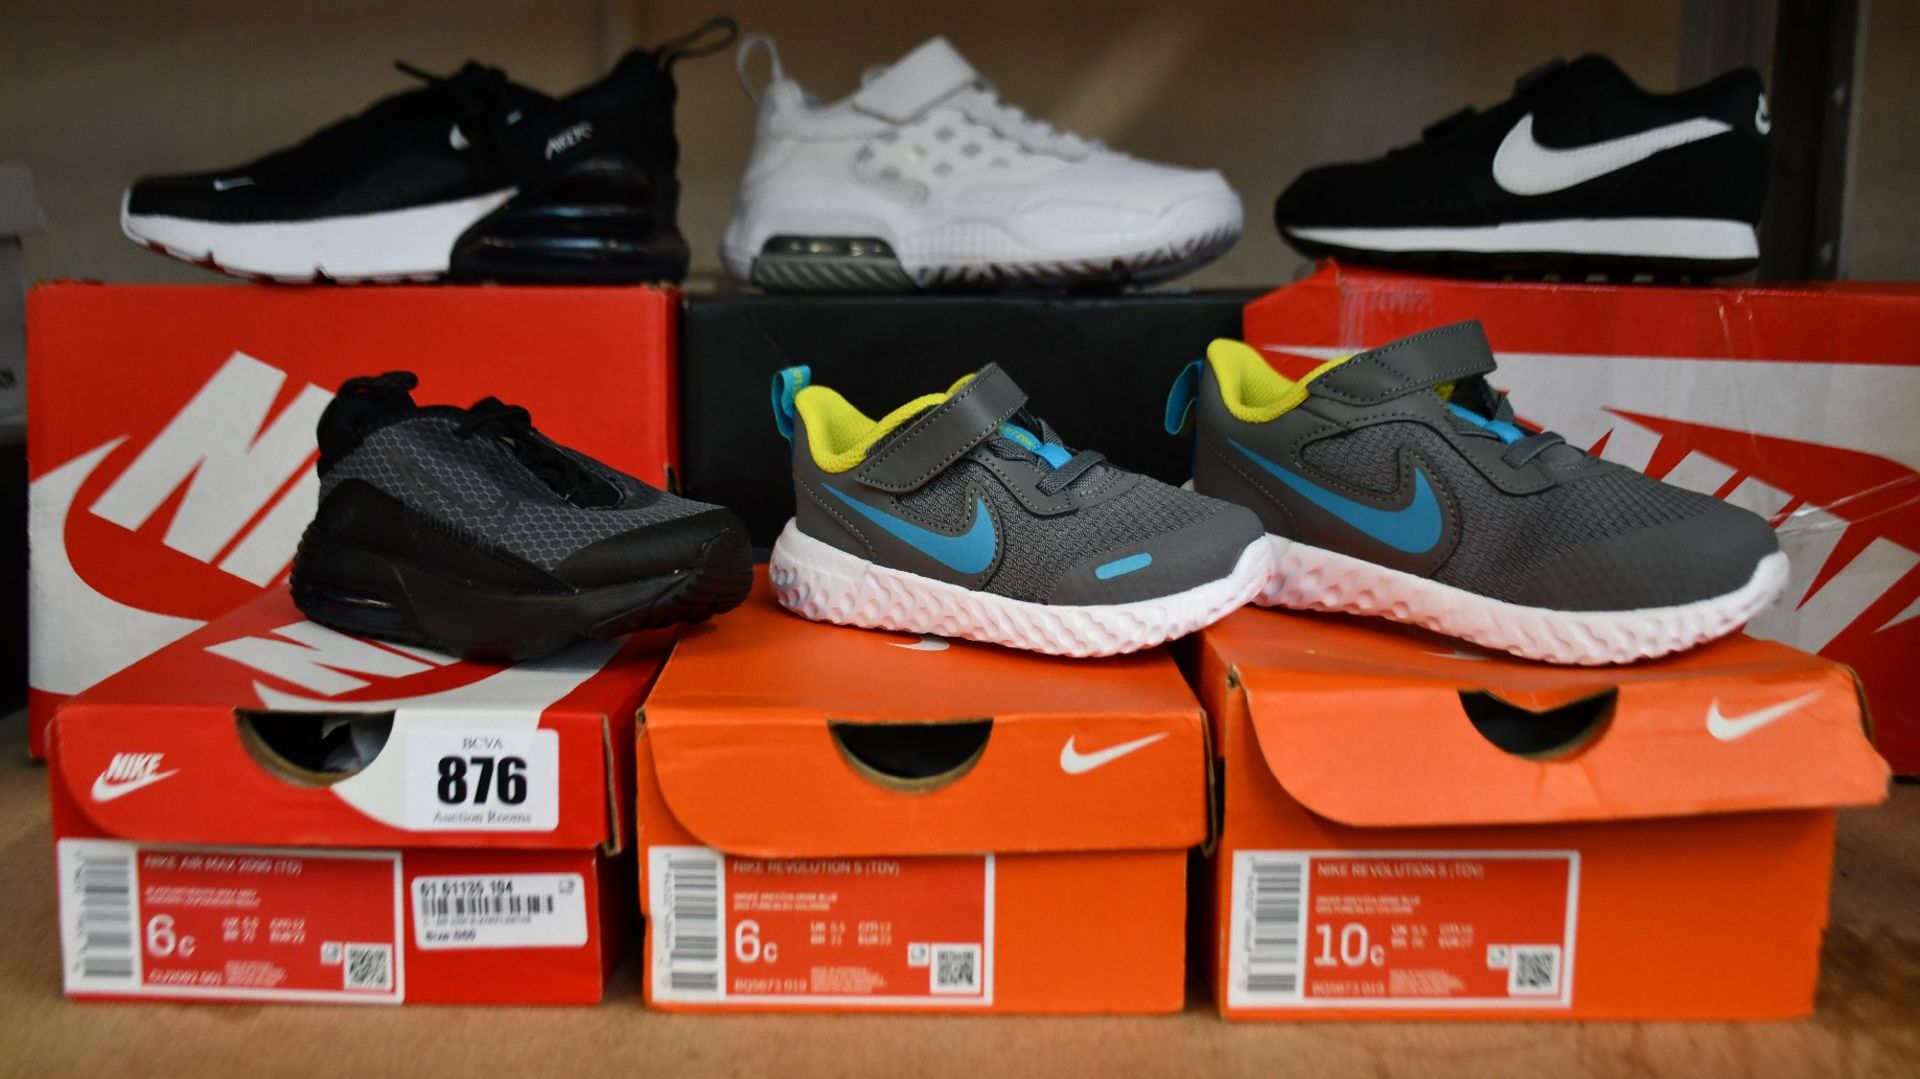 Six pairs of children's/toddlers assorted as new Nike trainers.